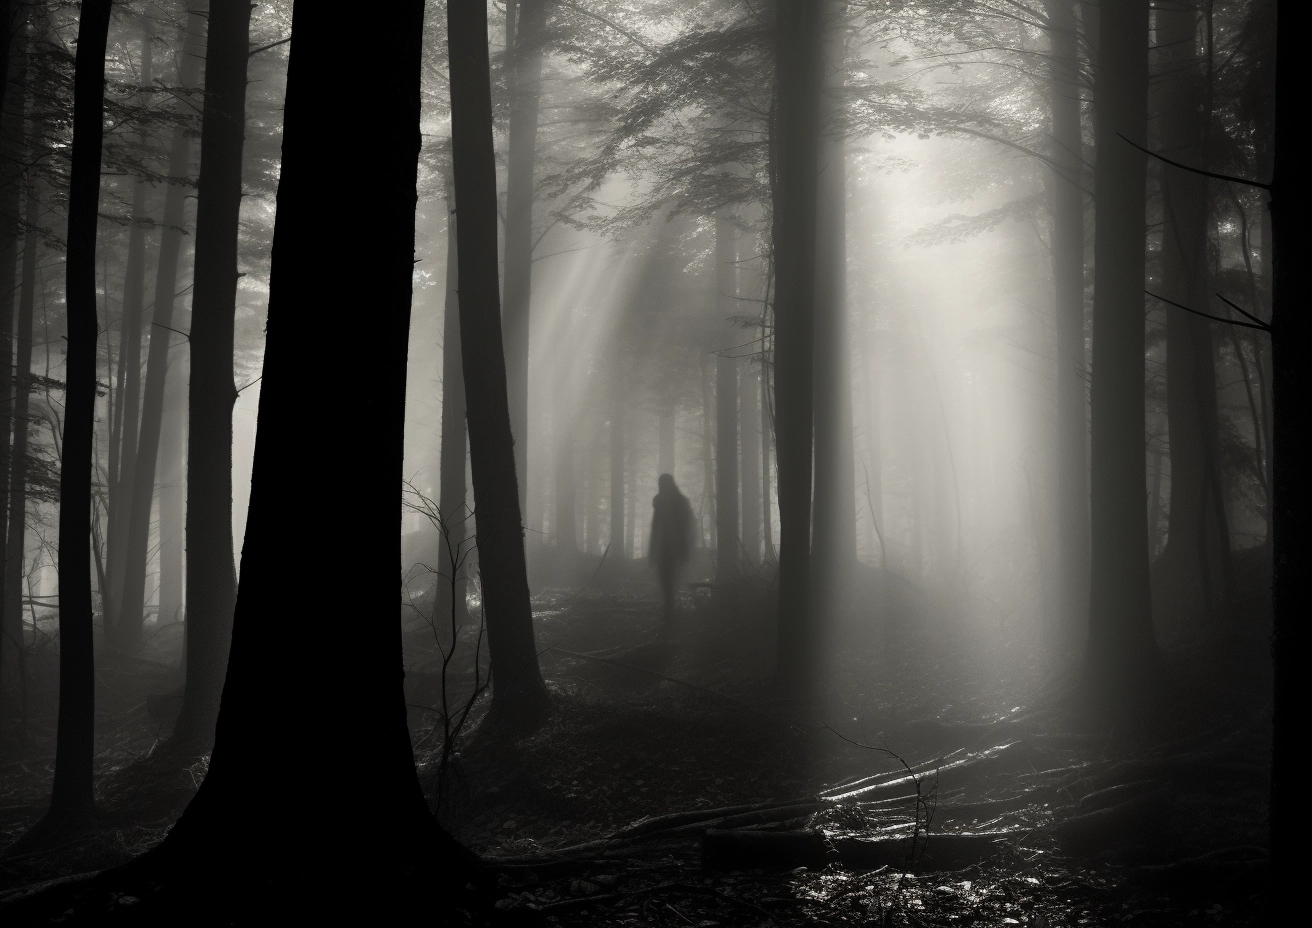 Spookier forest. A human silhouette is seen at a distance